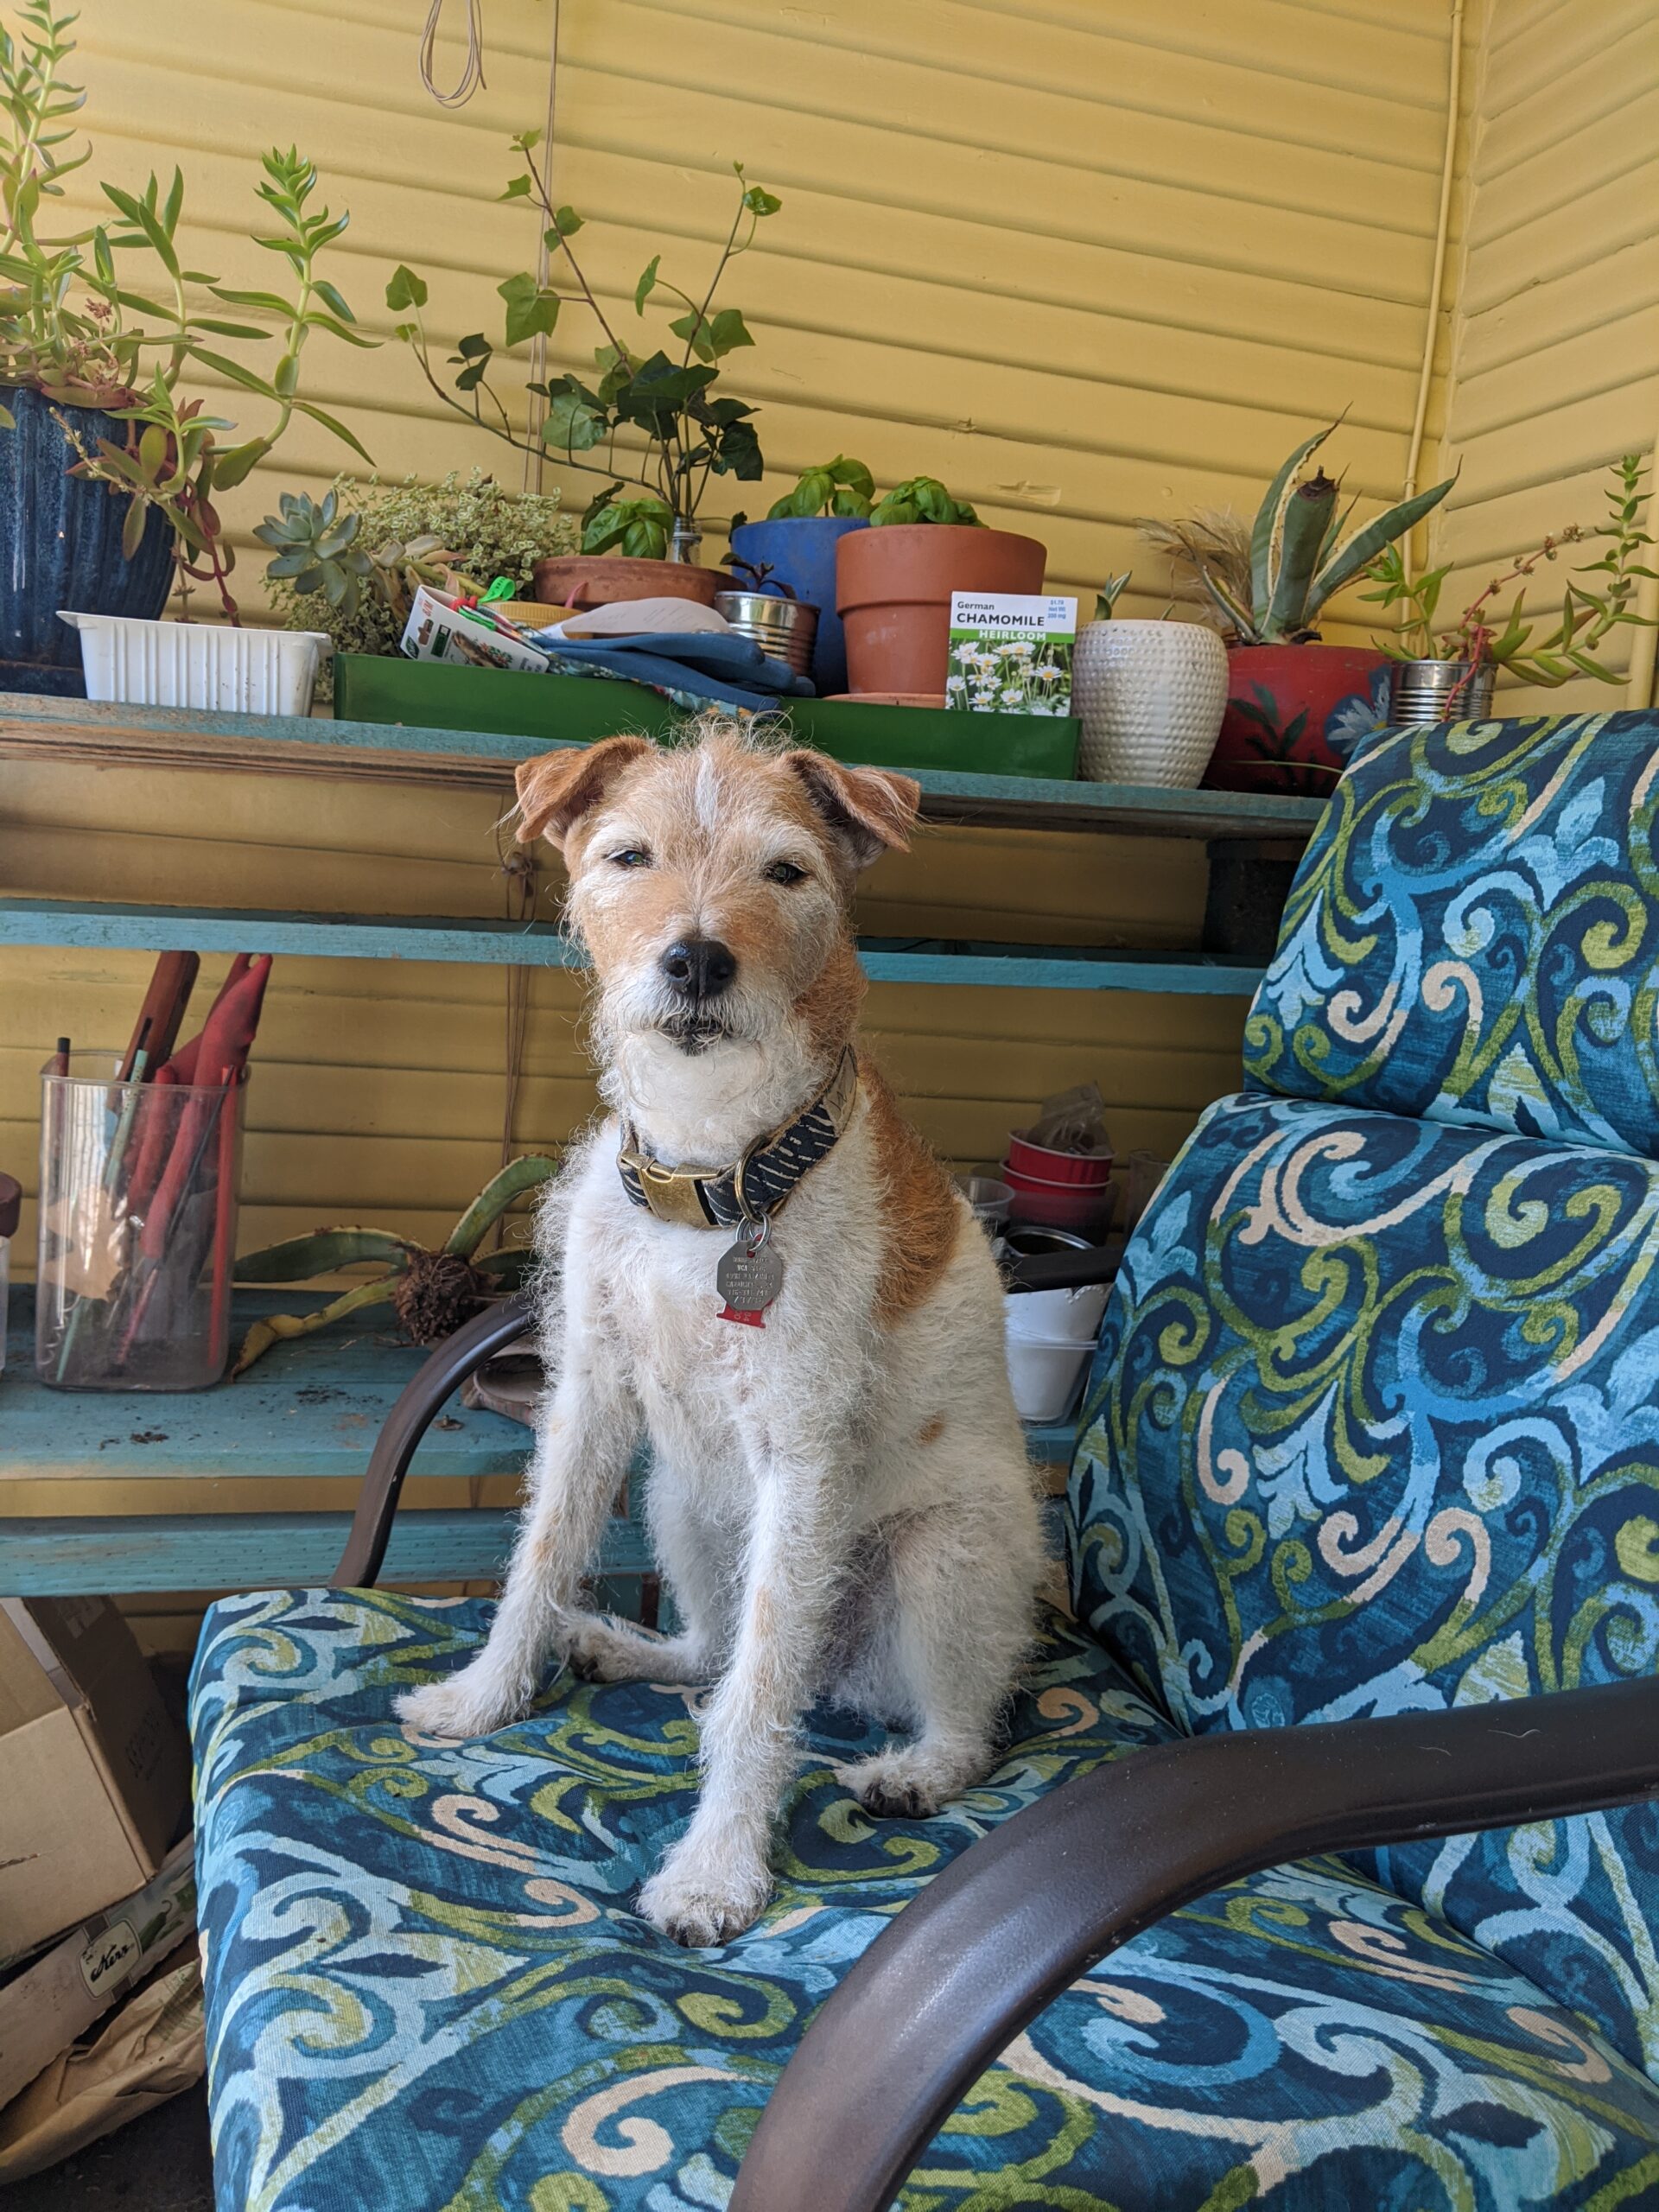 Macy, a tan and white scruffy terrier sites on a blue and green paisley patterned chair